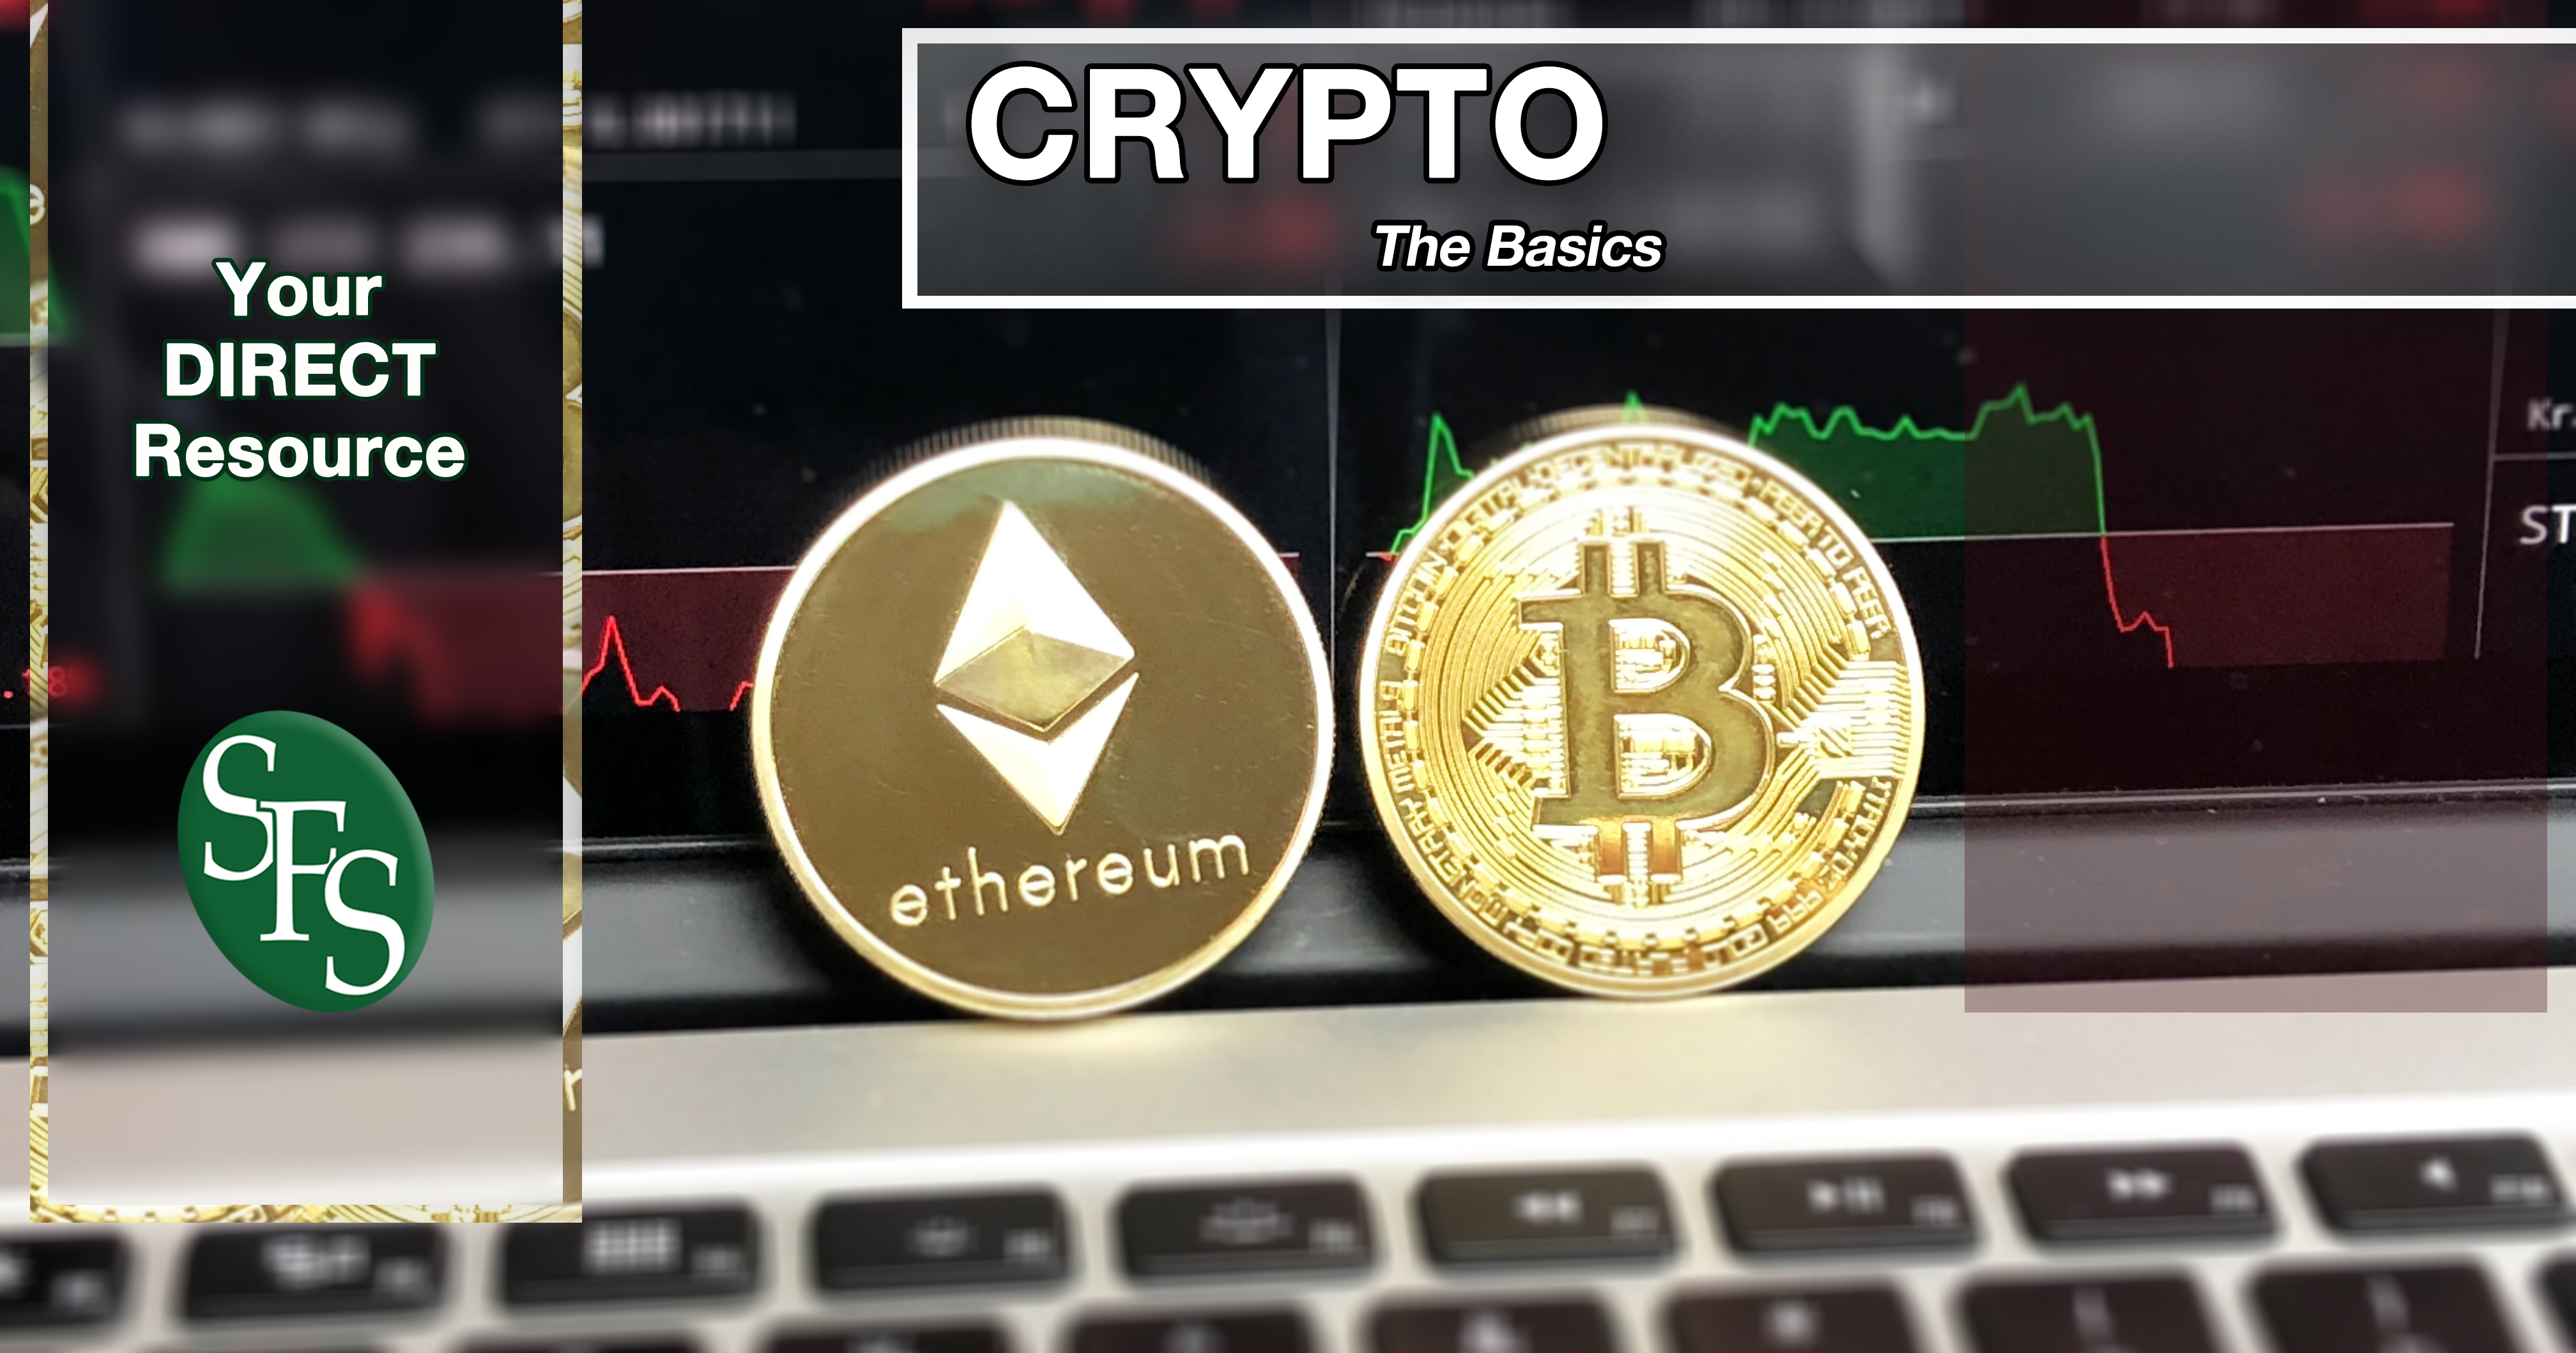 Basics of crypto currency trading